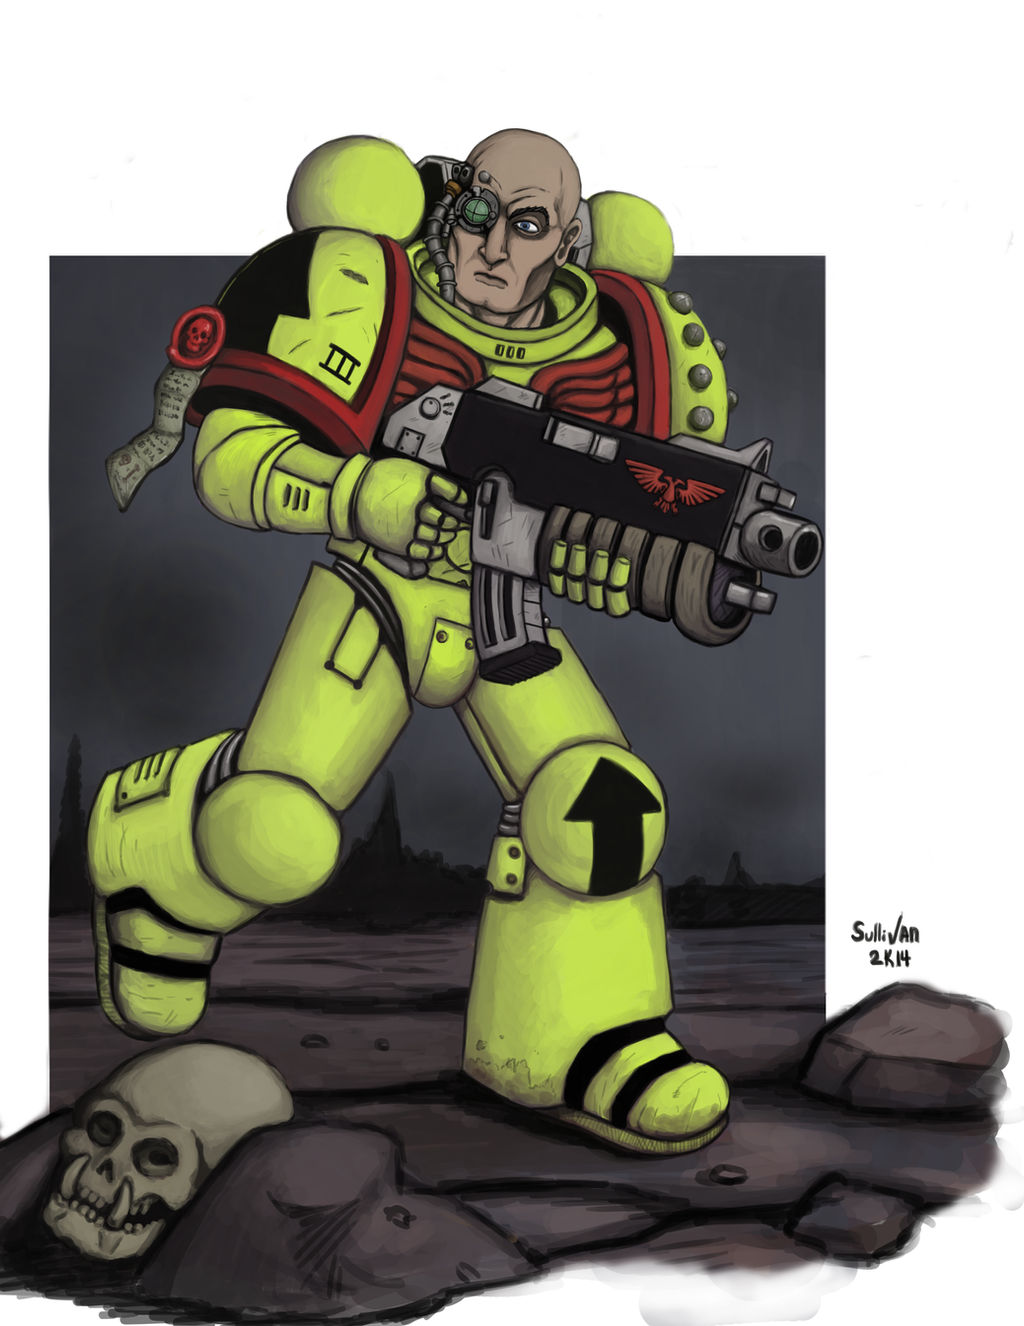 Another Space Marine.